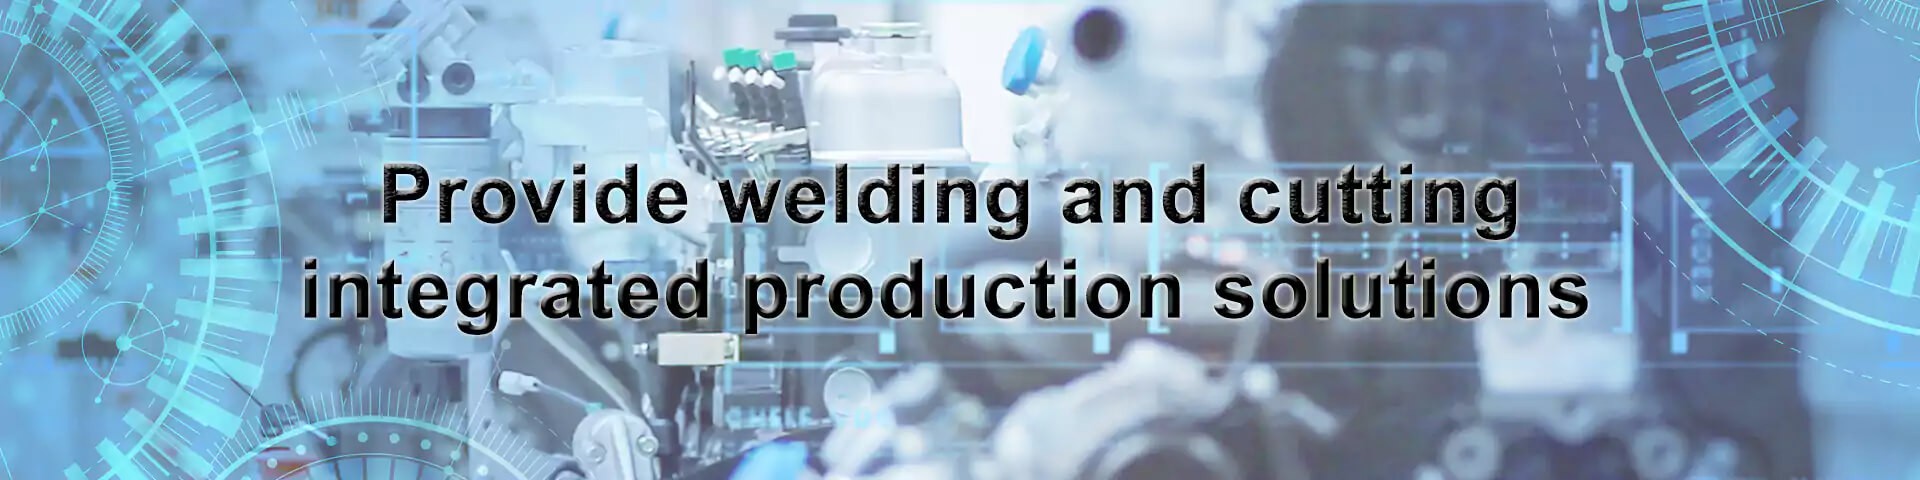 Provide welding and cutting integrated production solutions